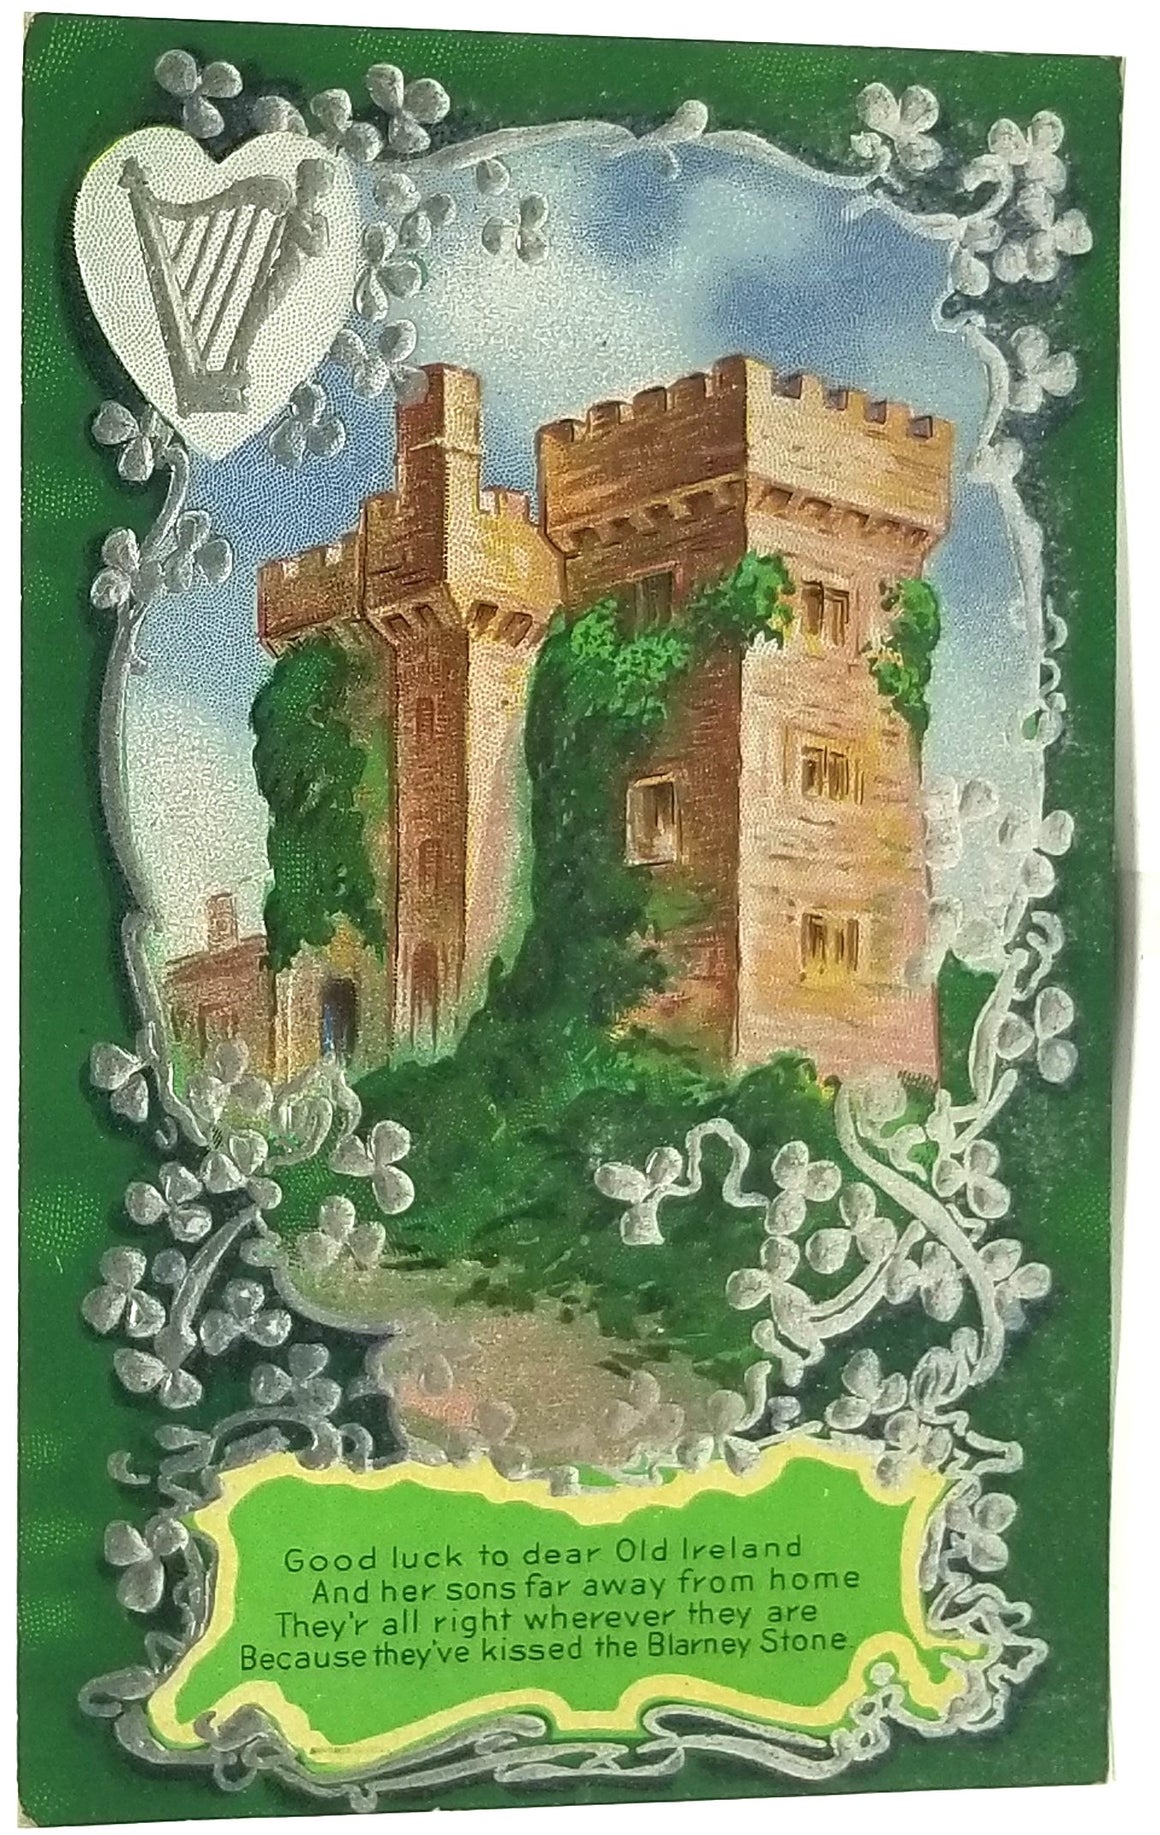 St Patrick's Day Postcard The Blarney Stone at Blarney's Castle Ireland Silver Highlights